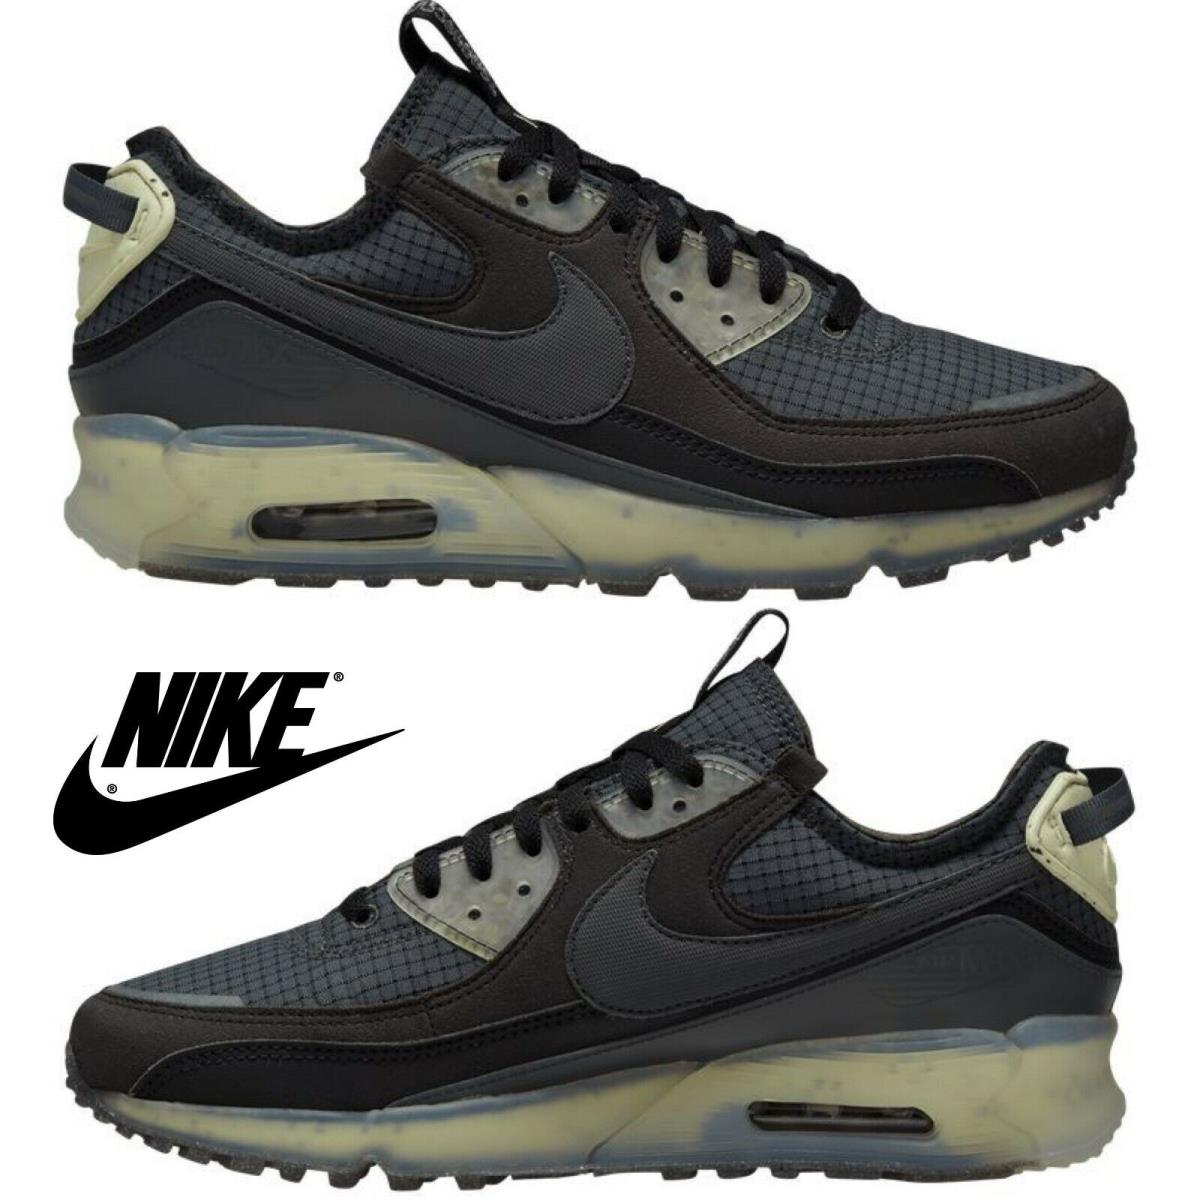 Nike Air Max 90 Terrascape Men`s Sneakers Running Athletic Sport Comfort Shoes